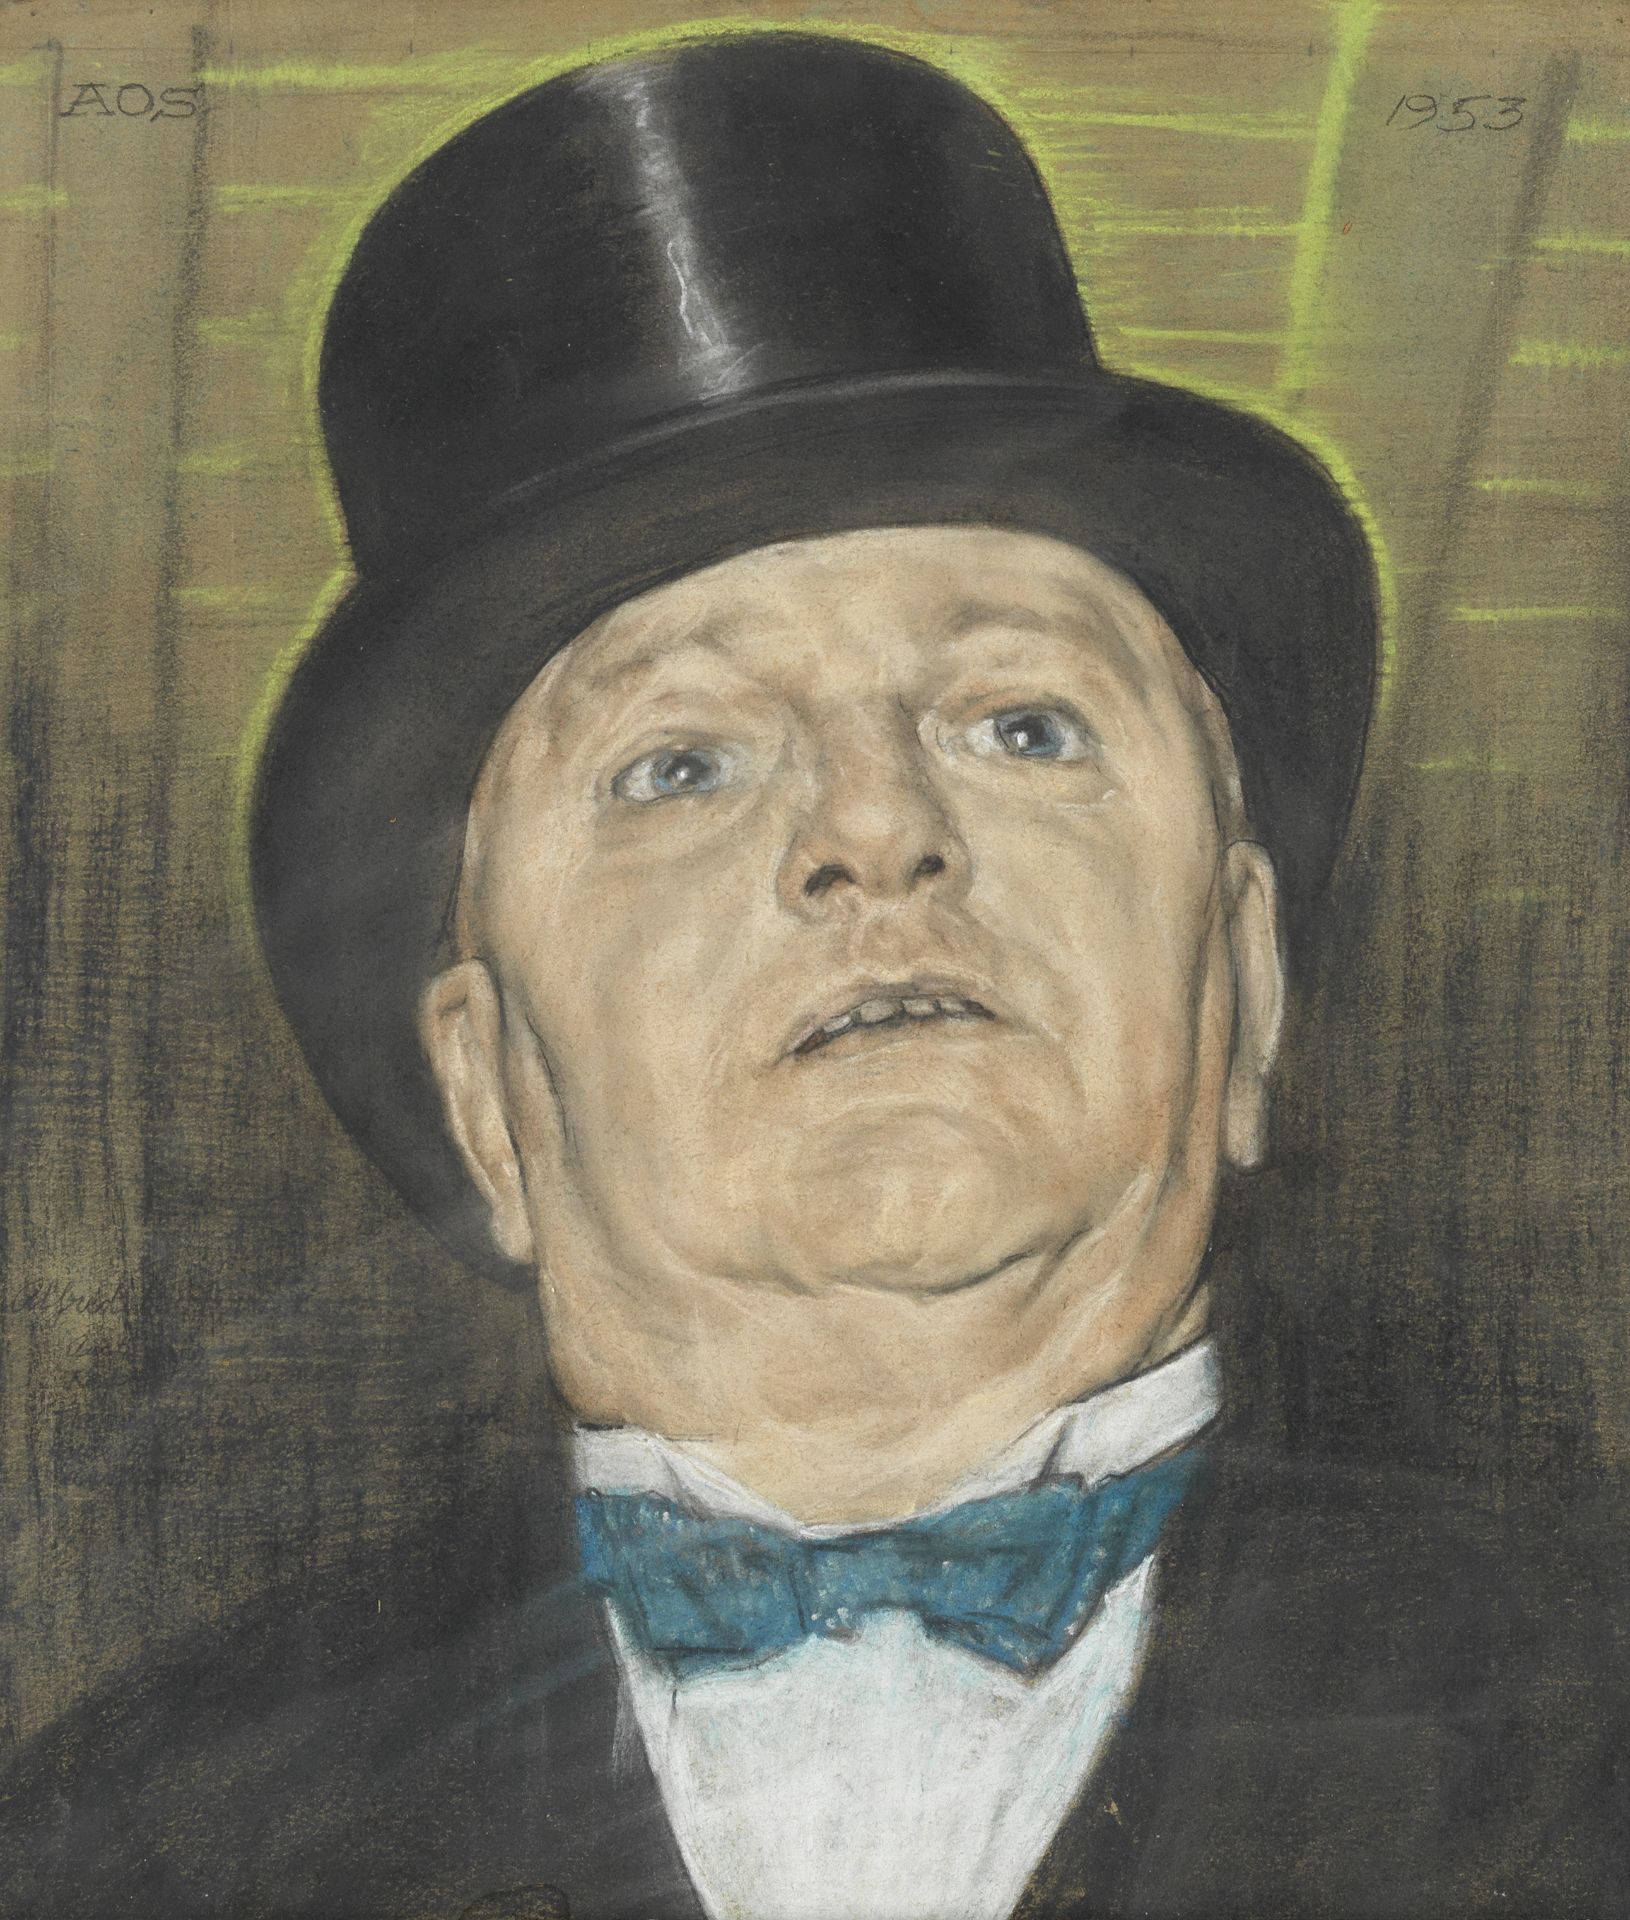 Austin Osman Spare (British, 1886-1956) Man from the Meat Market with Bowtie and Top Hat